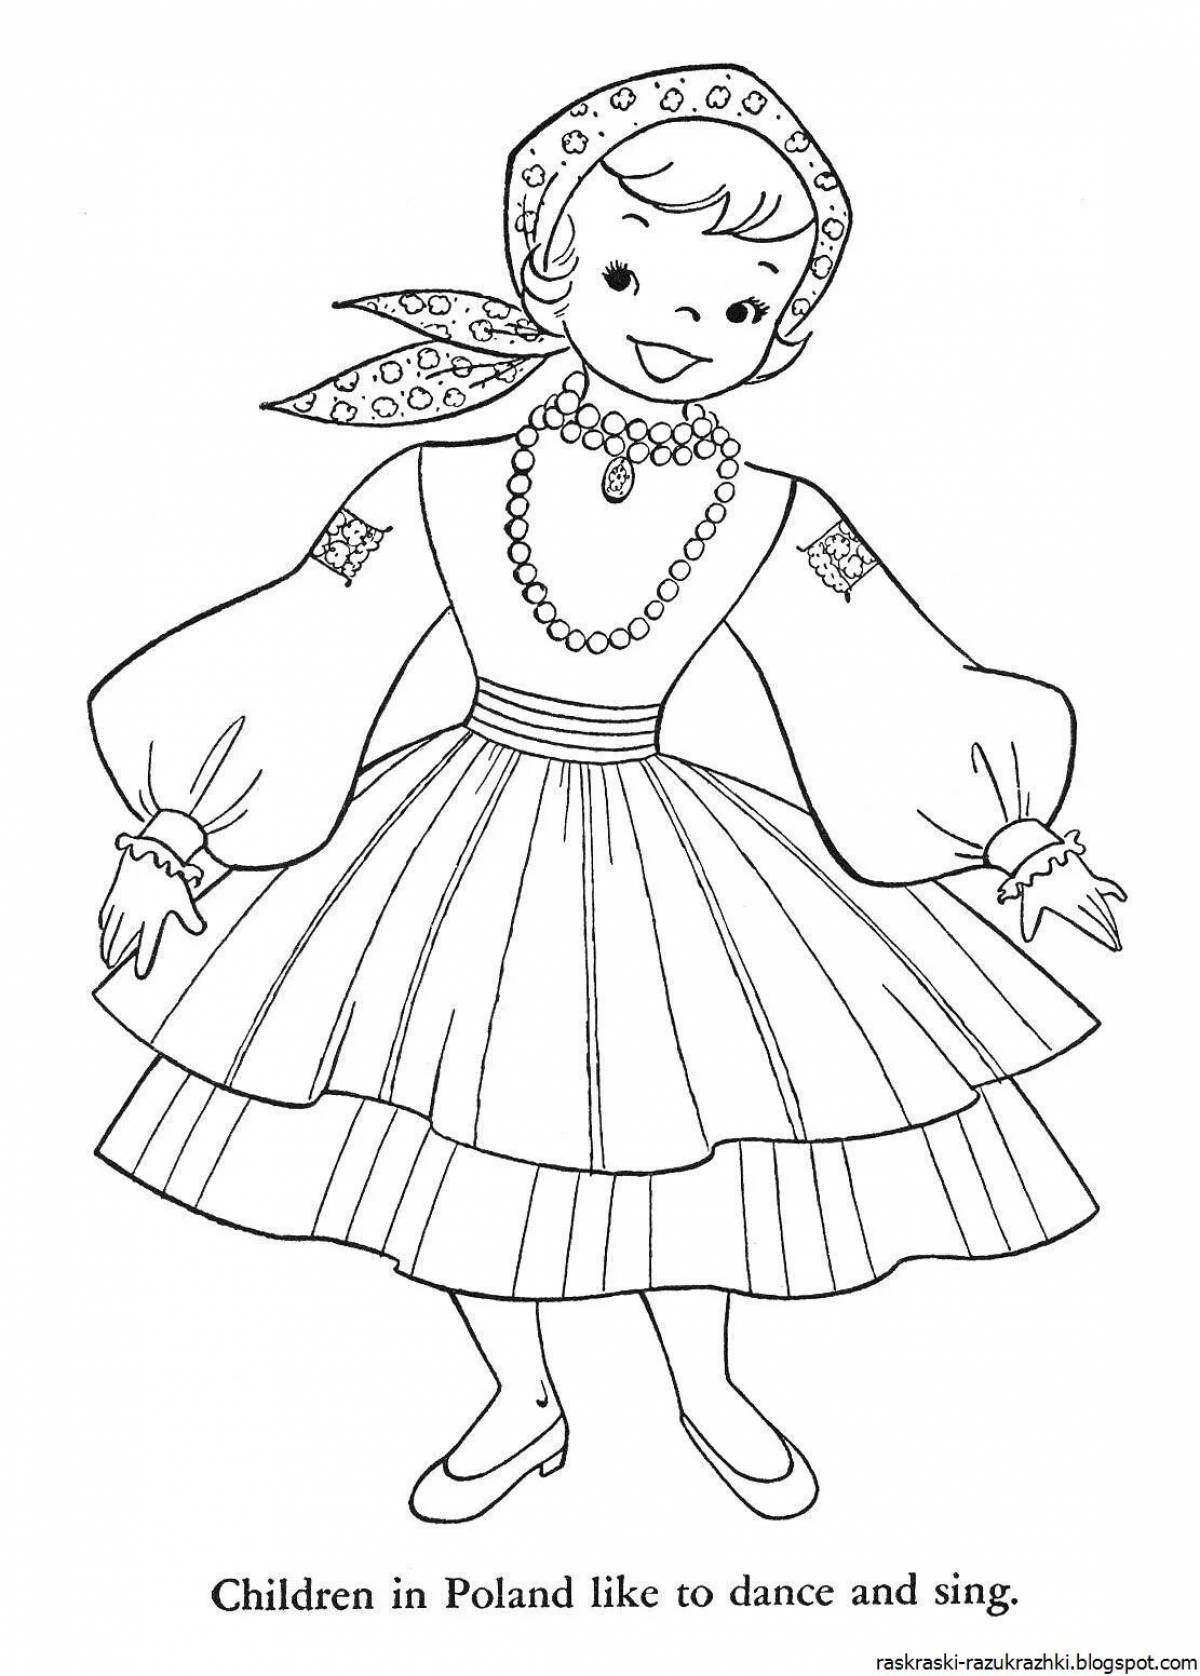 Fun coloring Russian costume for babies